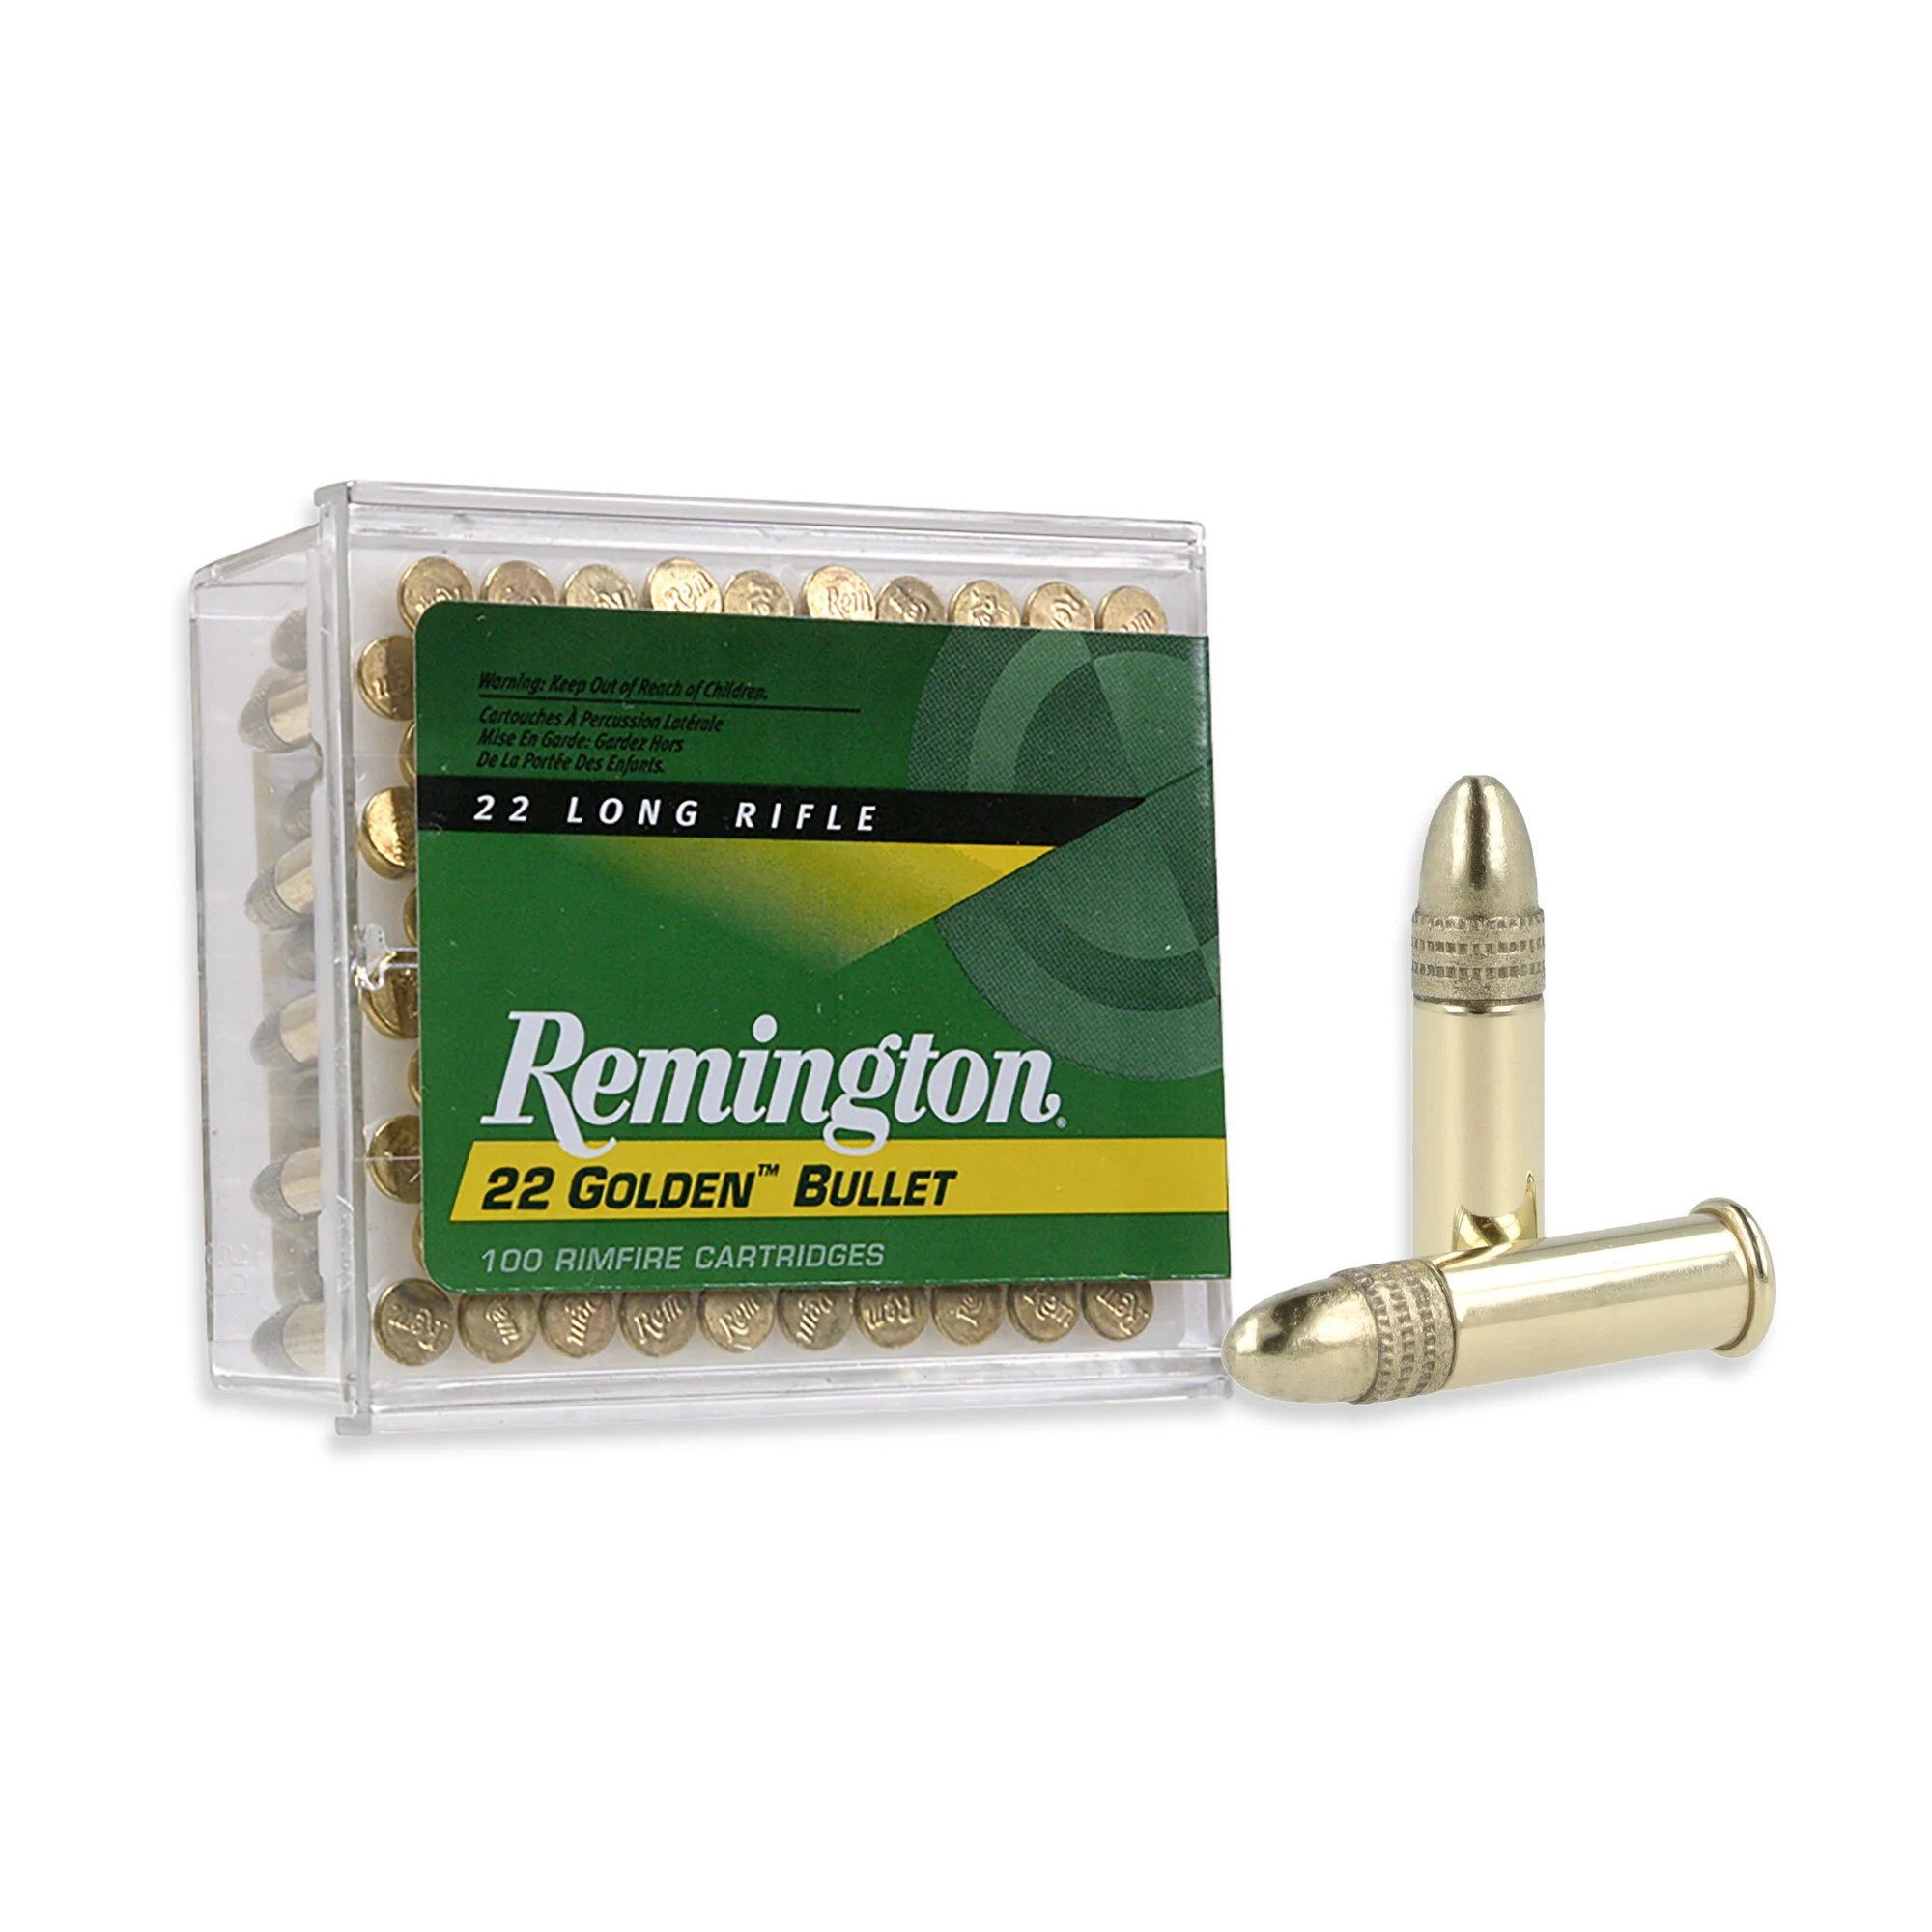 What is Considered High Velocity 22LR Ammo?